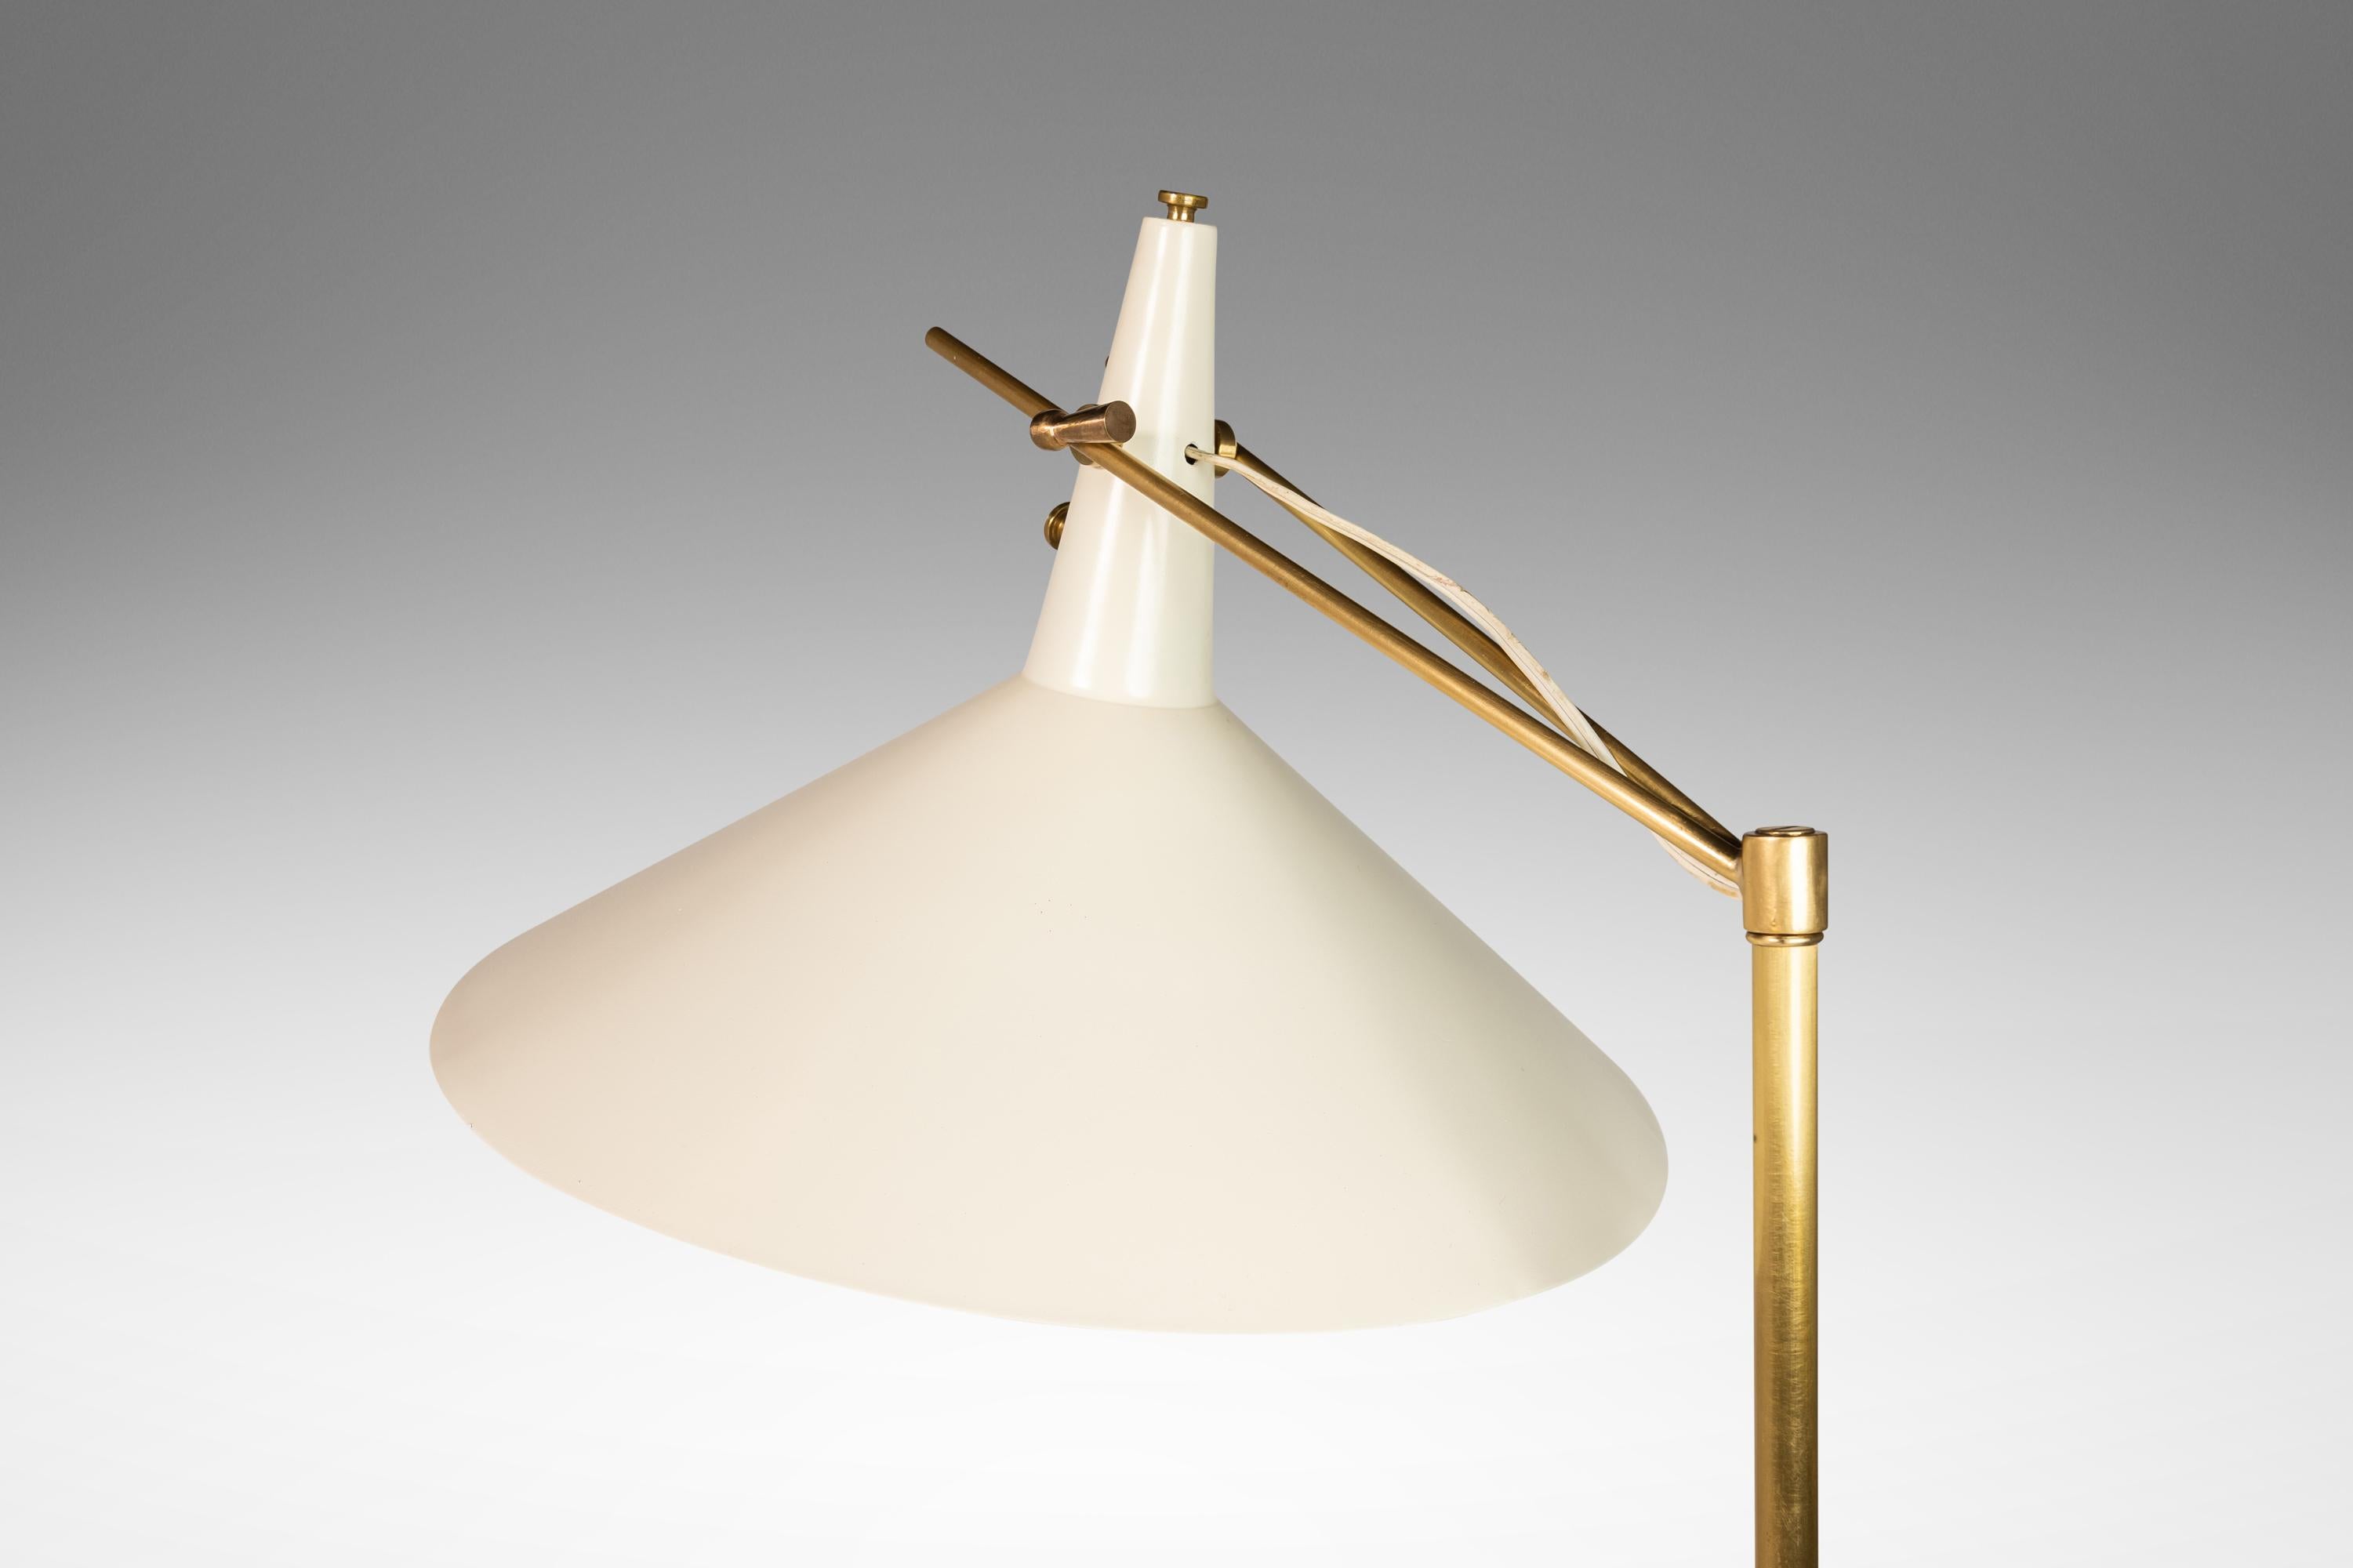 Mid-Century Model E-11 Floor Lamp by Paul McCobb for Directional, USA, c. 1950's For Sale 4